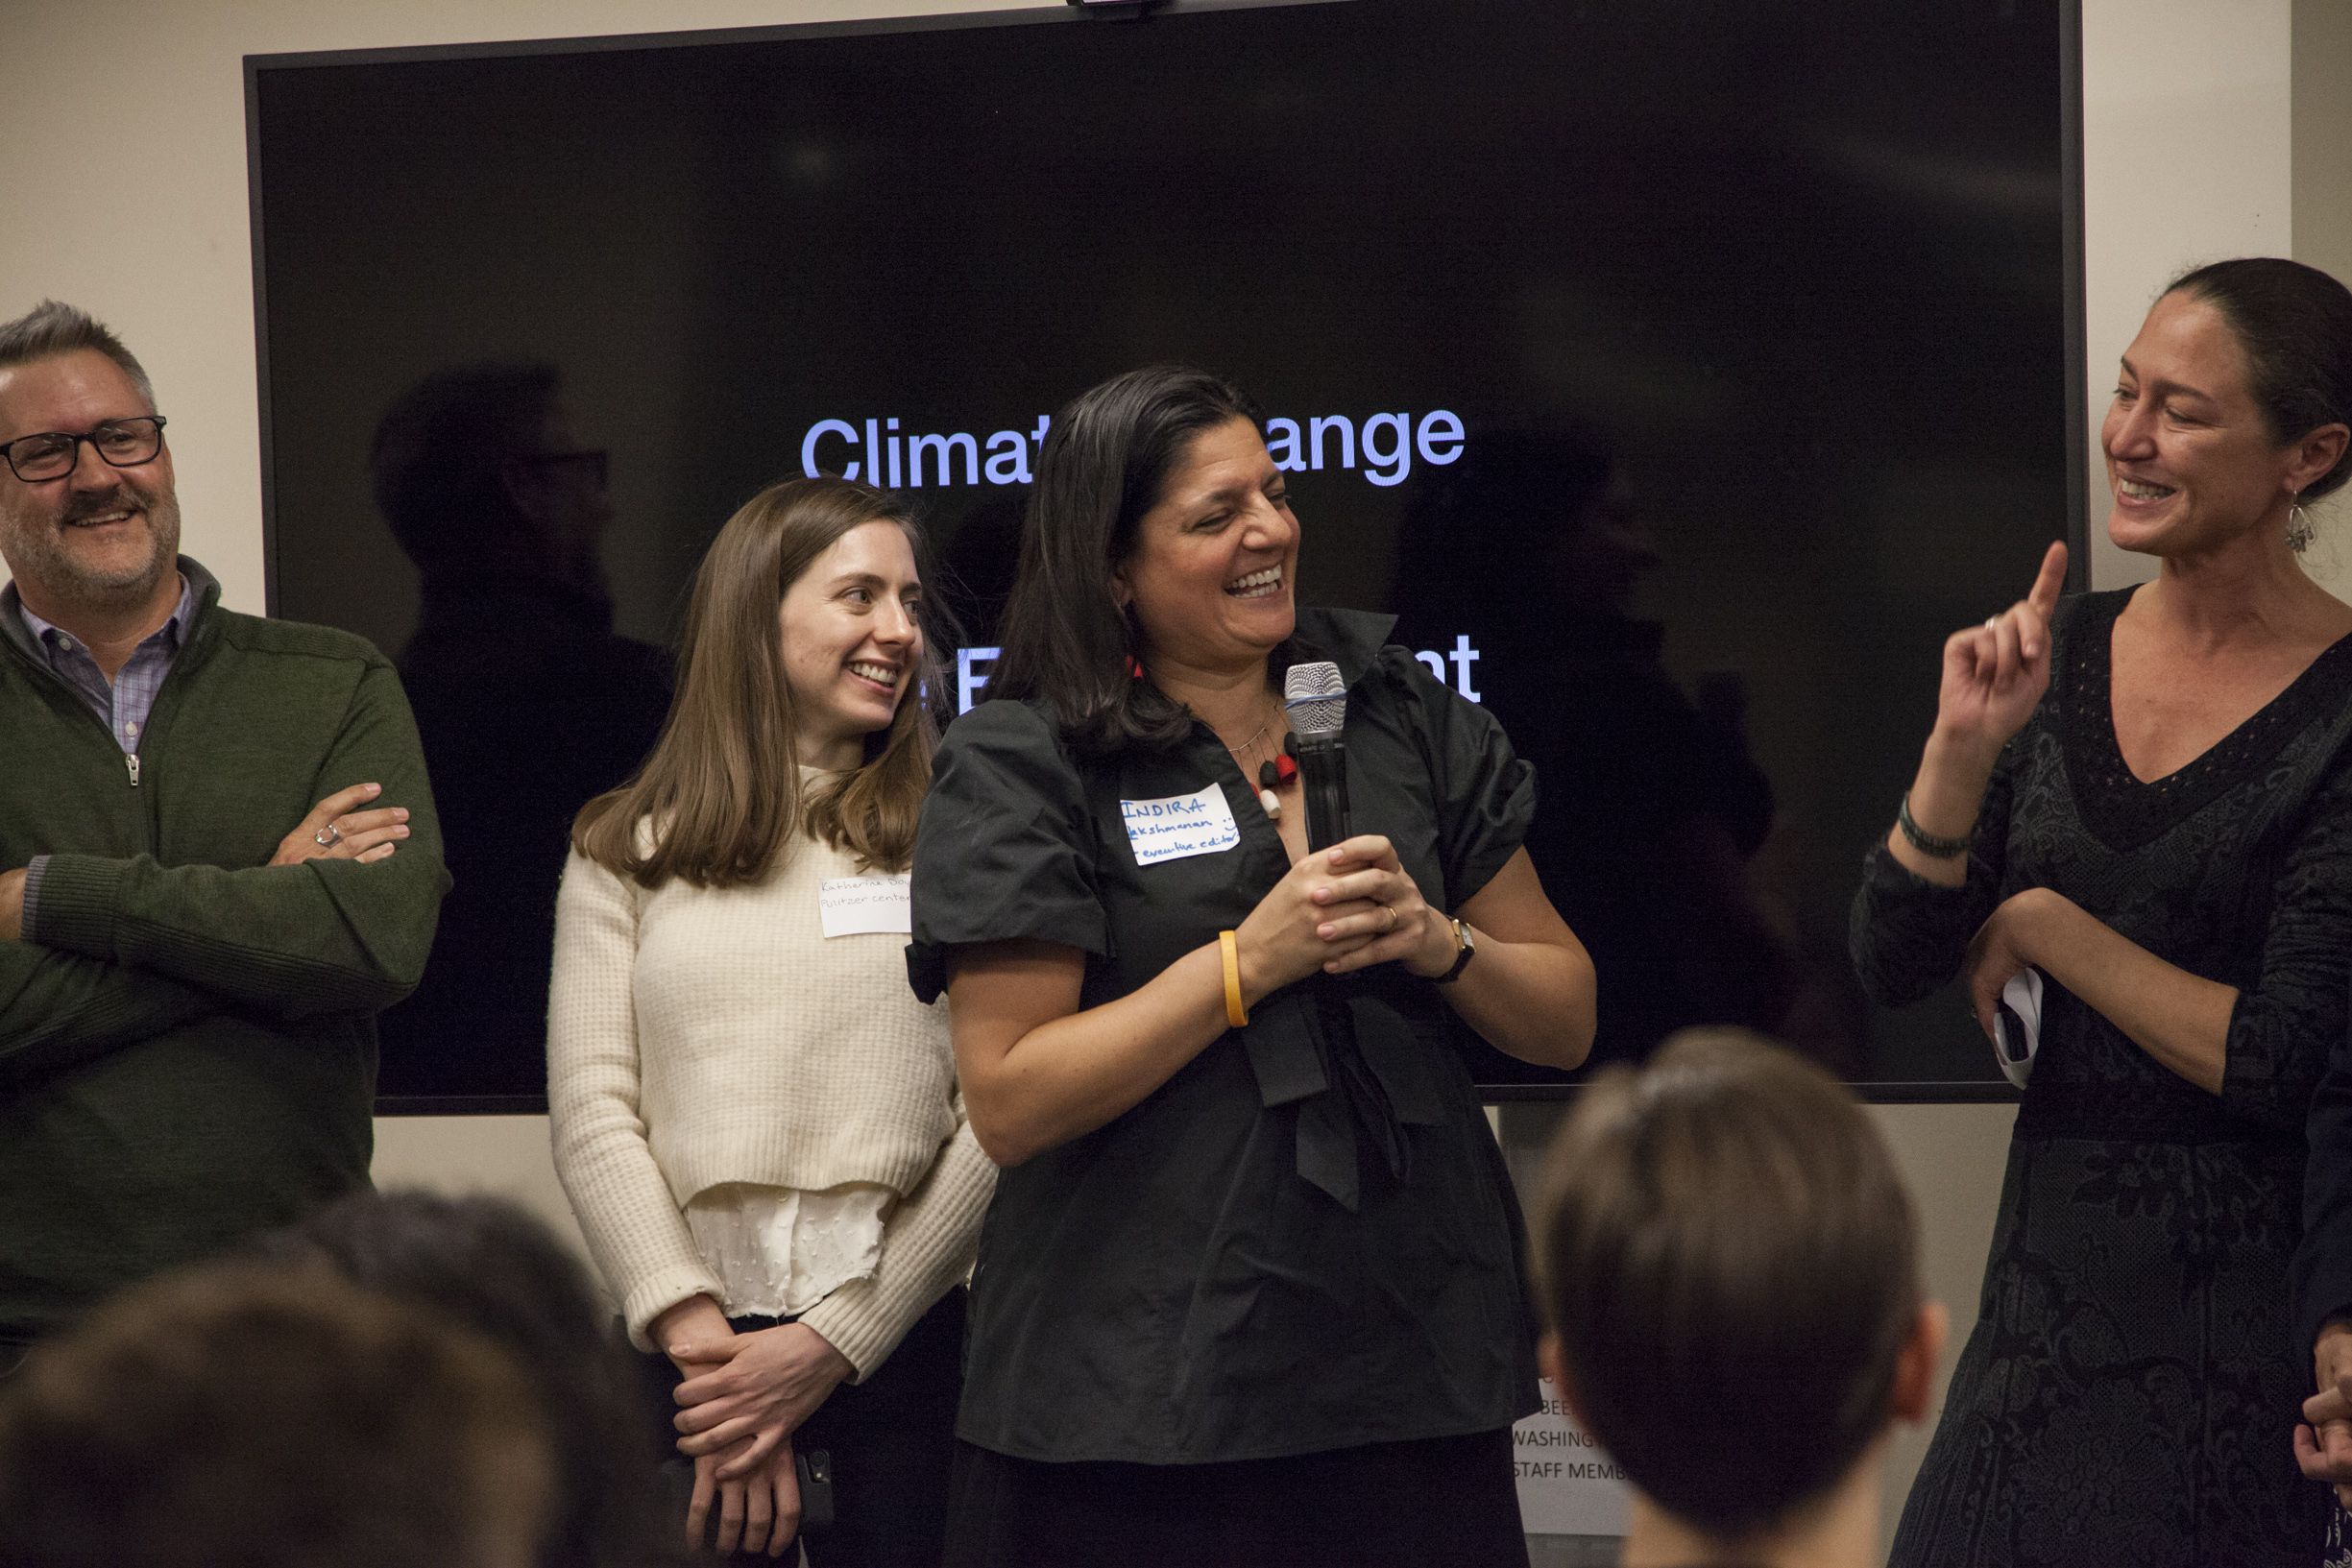 Pulitzer Center Executive Editor laughs with Managing Director Nathalie Applewhite during staff introductions. Behind them are Pulitzer Center staff members Steve Sapienza and Katherine Doyle. Image by Jin Ding. United States, 2018.